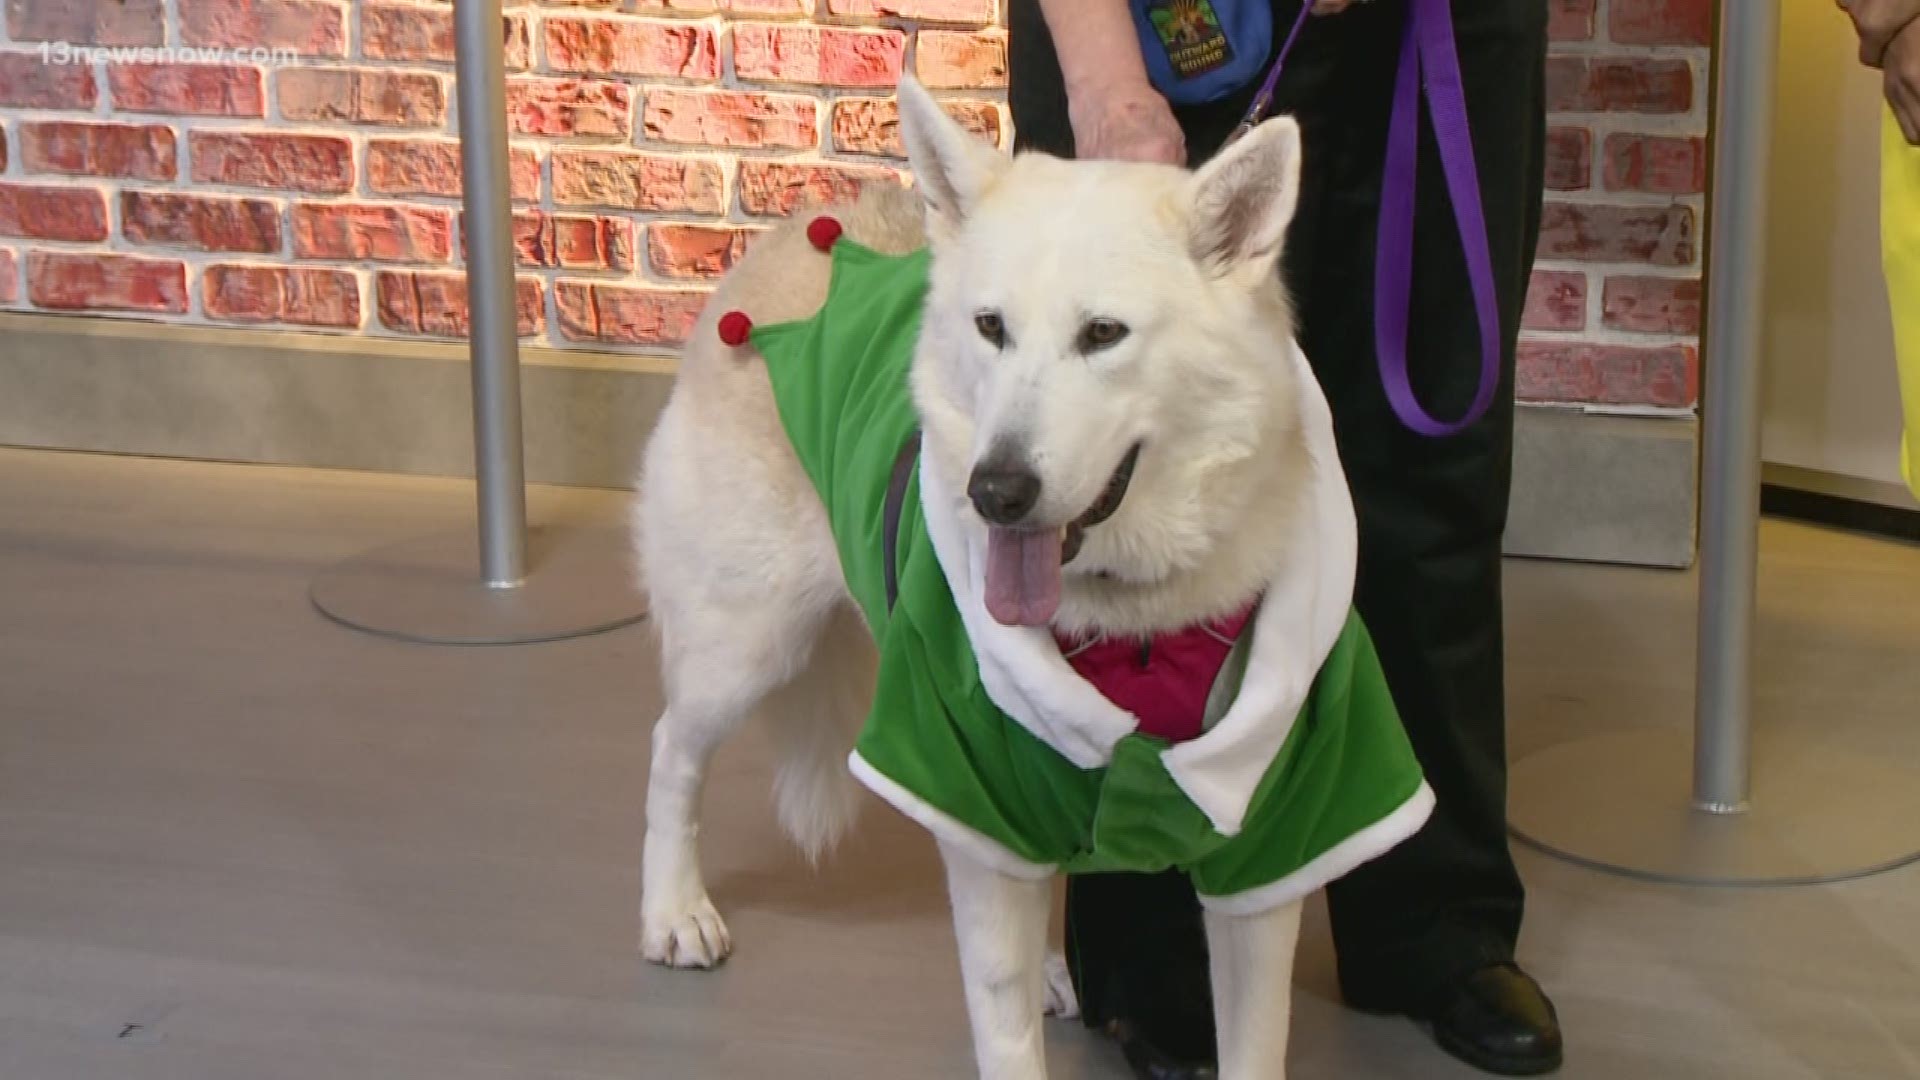 Rainbow Animal Rescue brought in Kyra to the studio. Kyra is looking for her forever family.